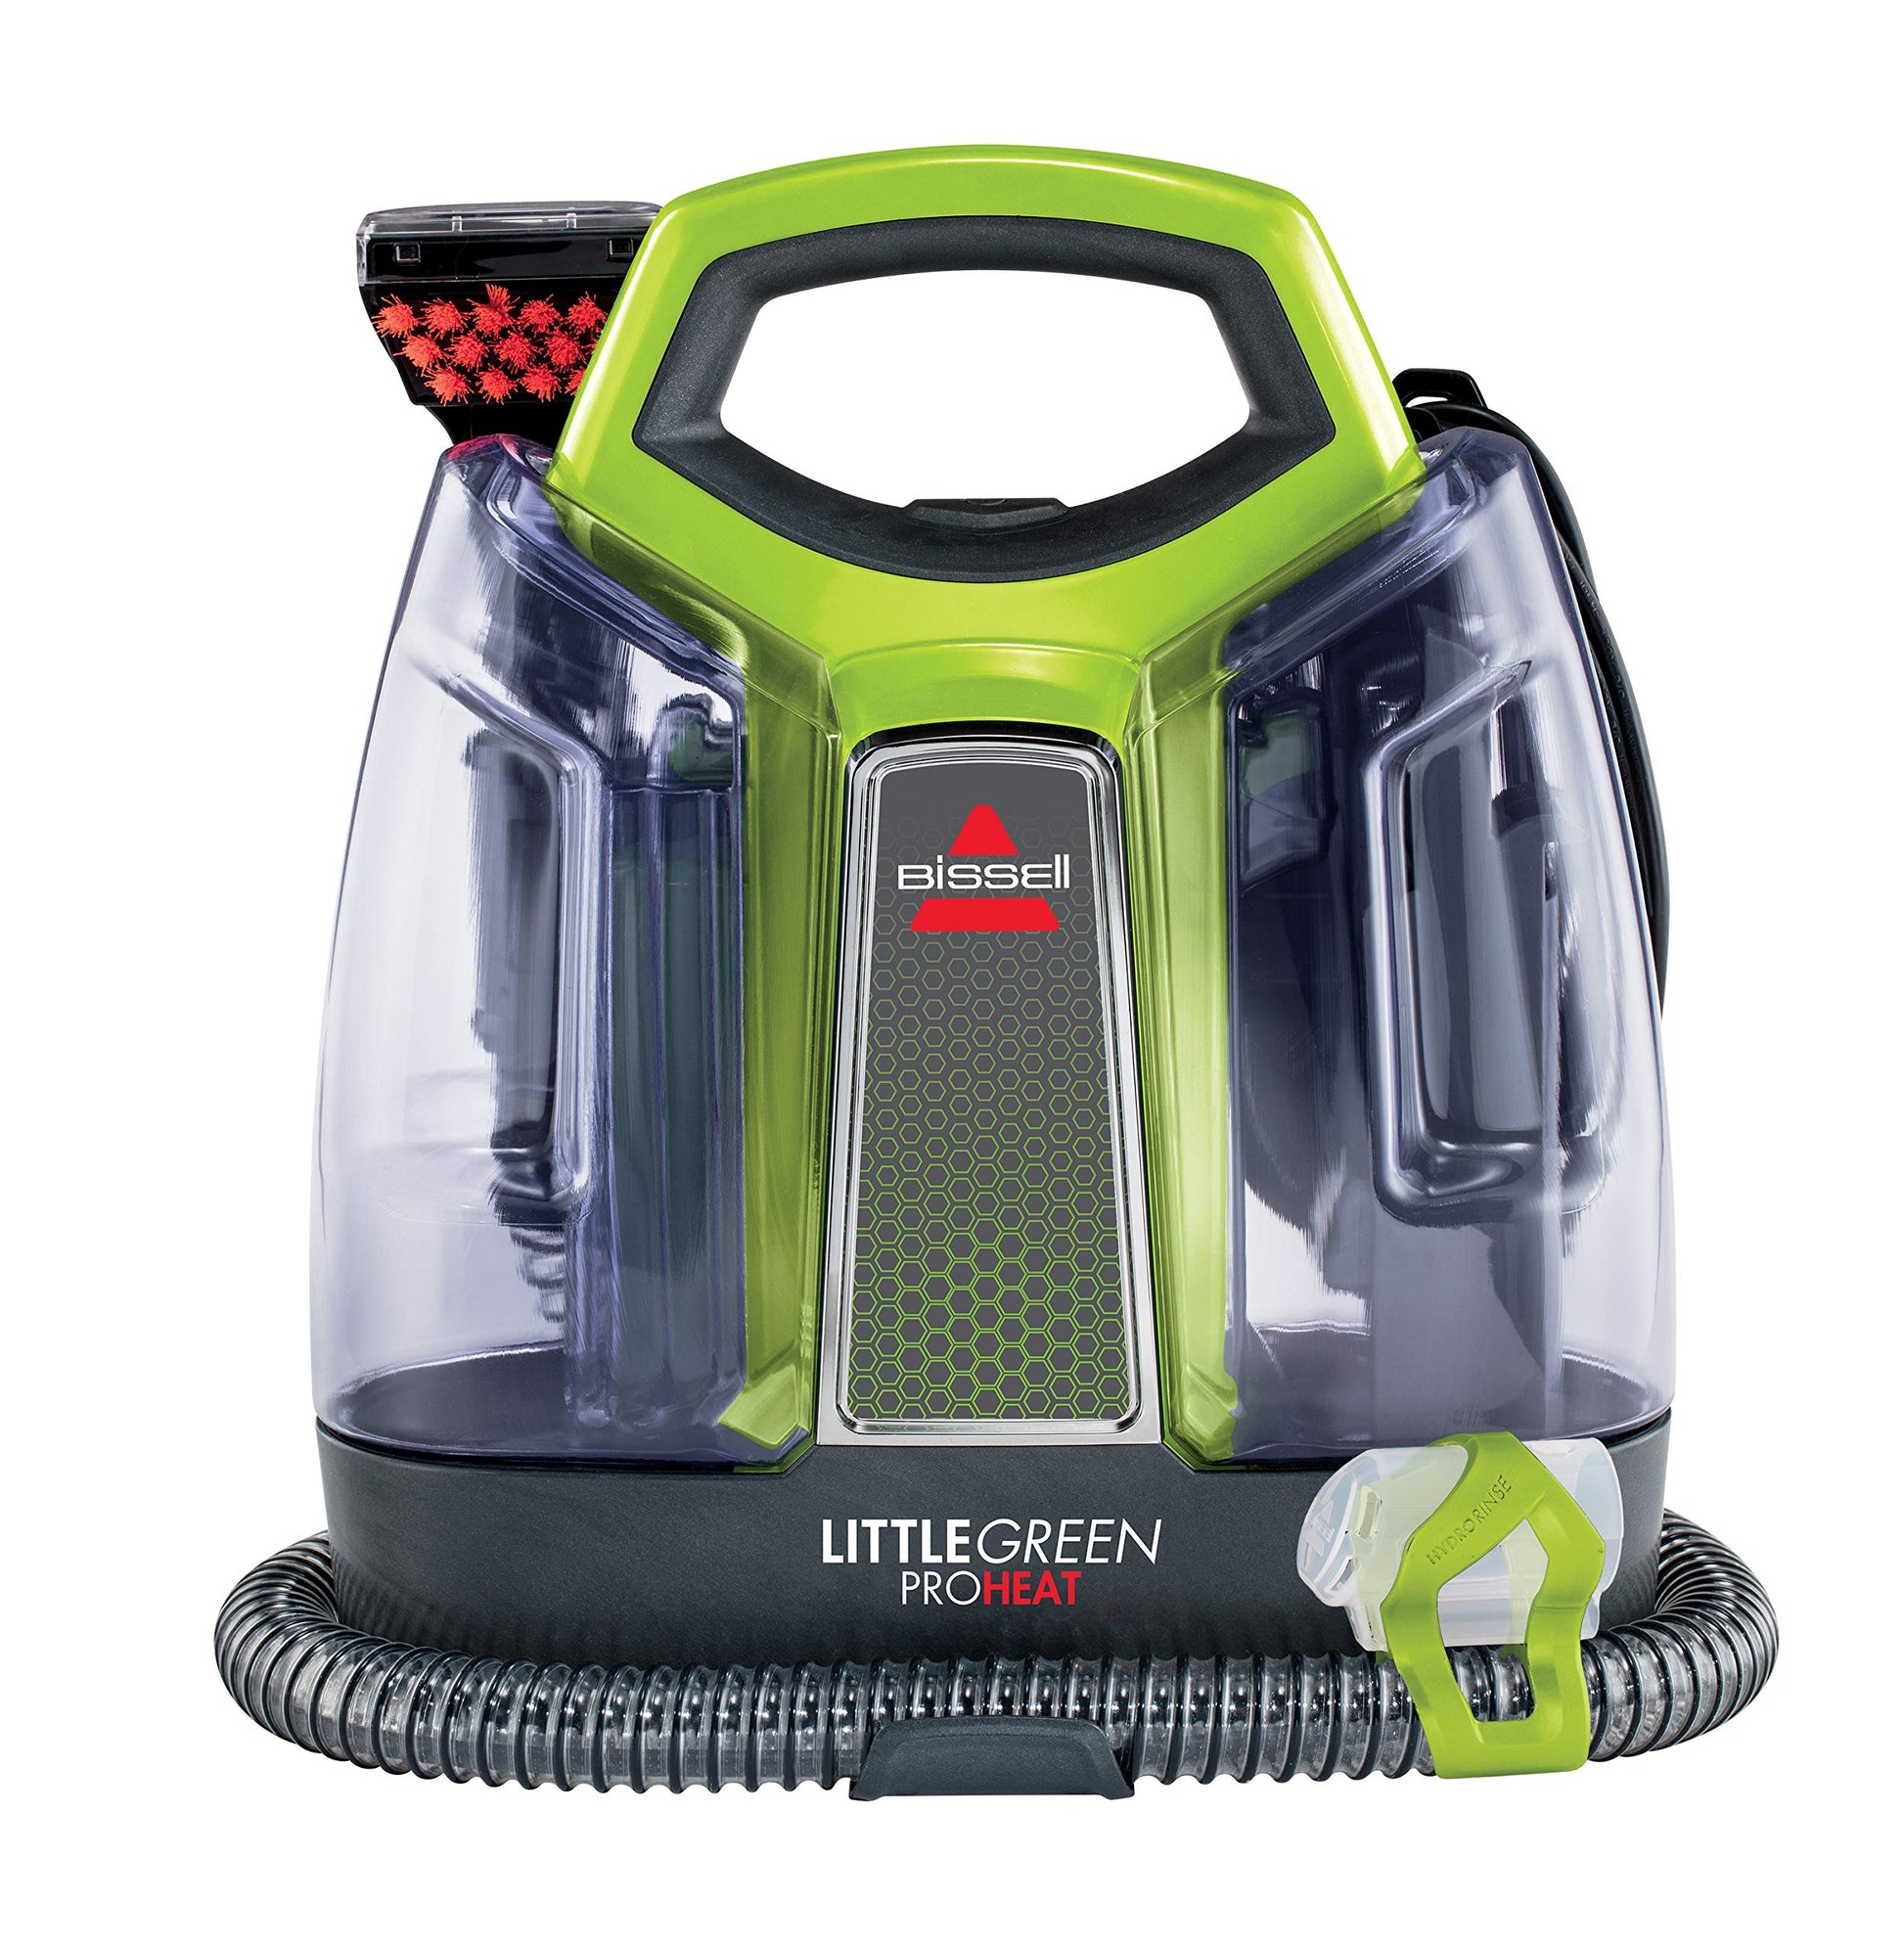 Bissell Little Green Proheat Portable Deep Cleaner Phil and Gazelle